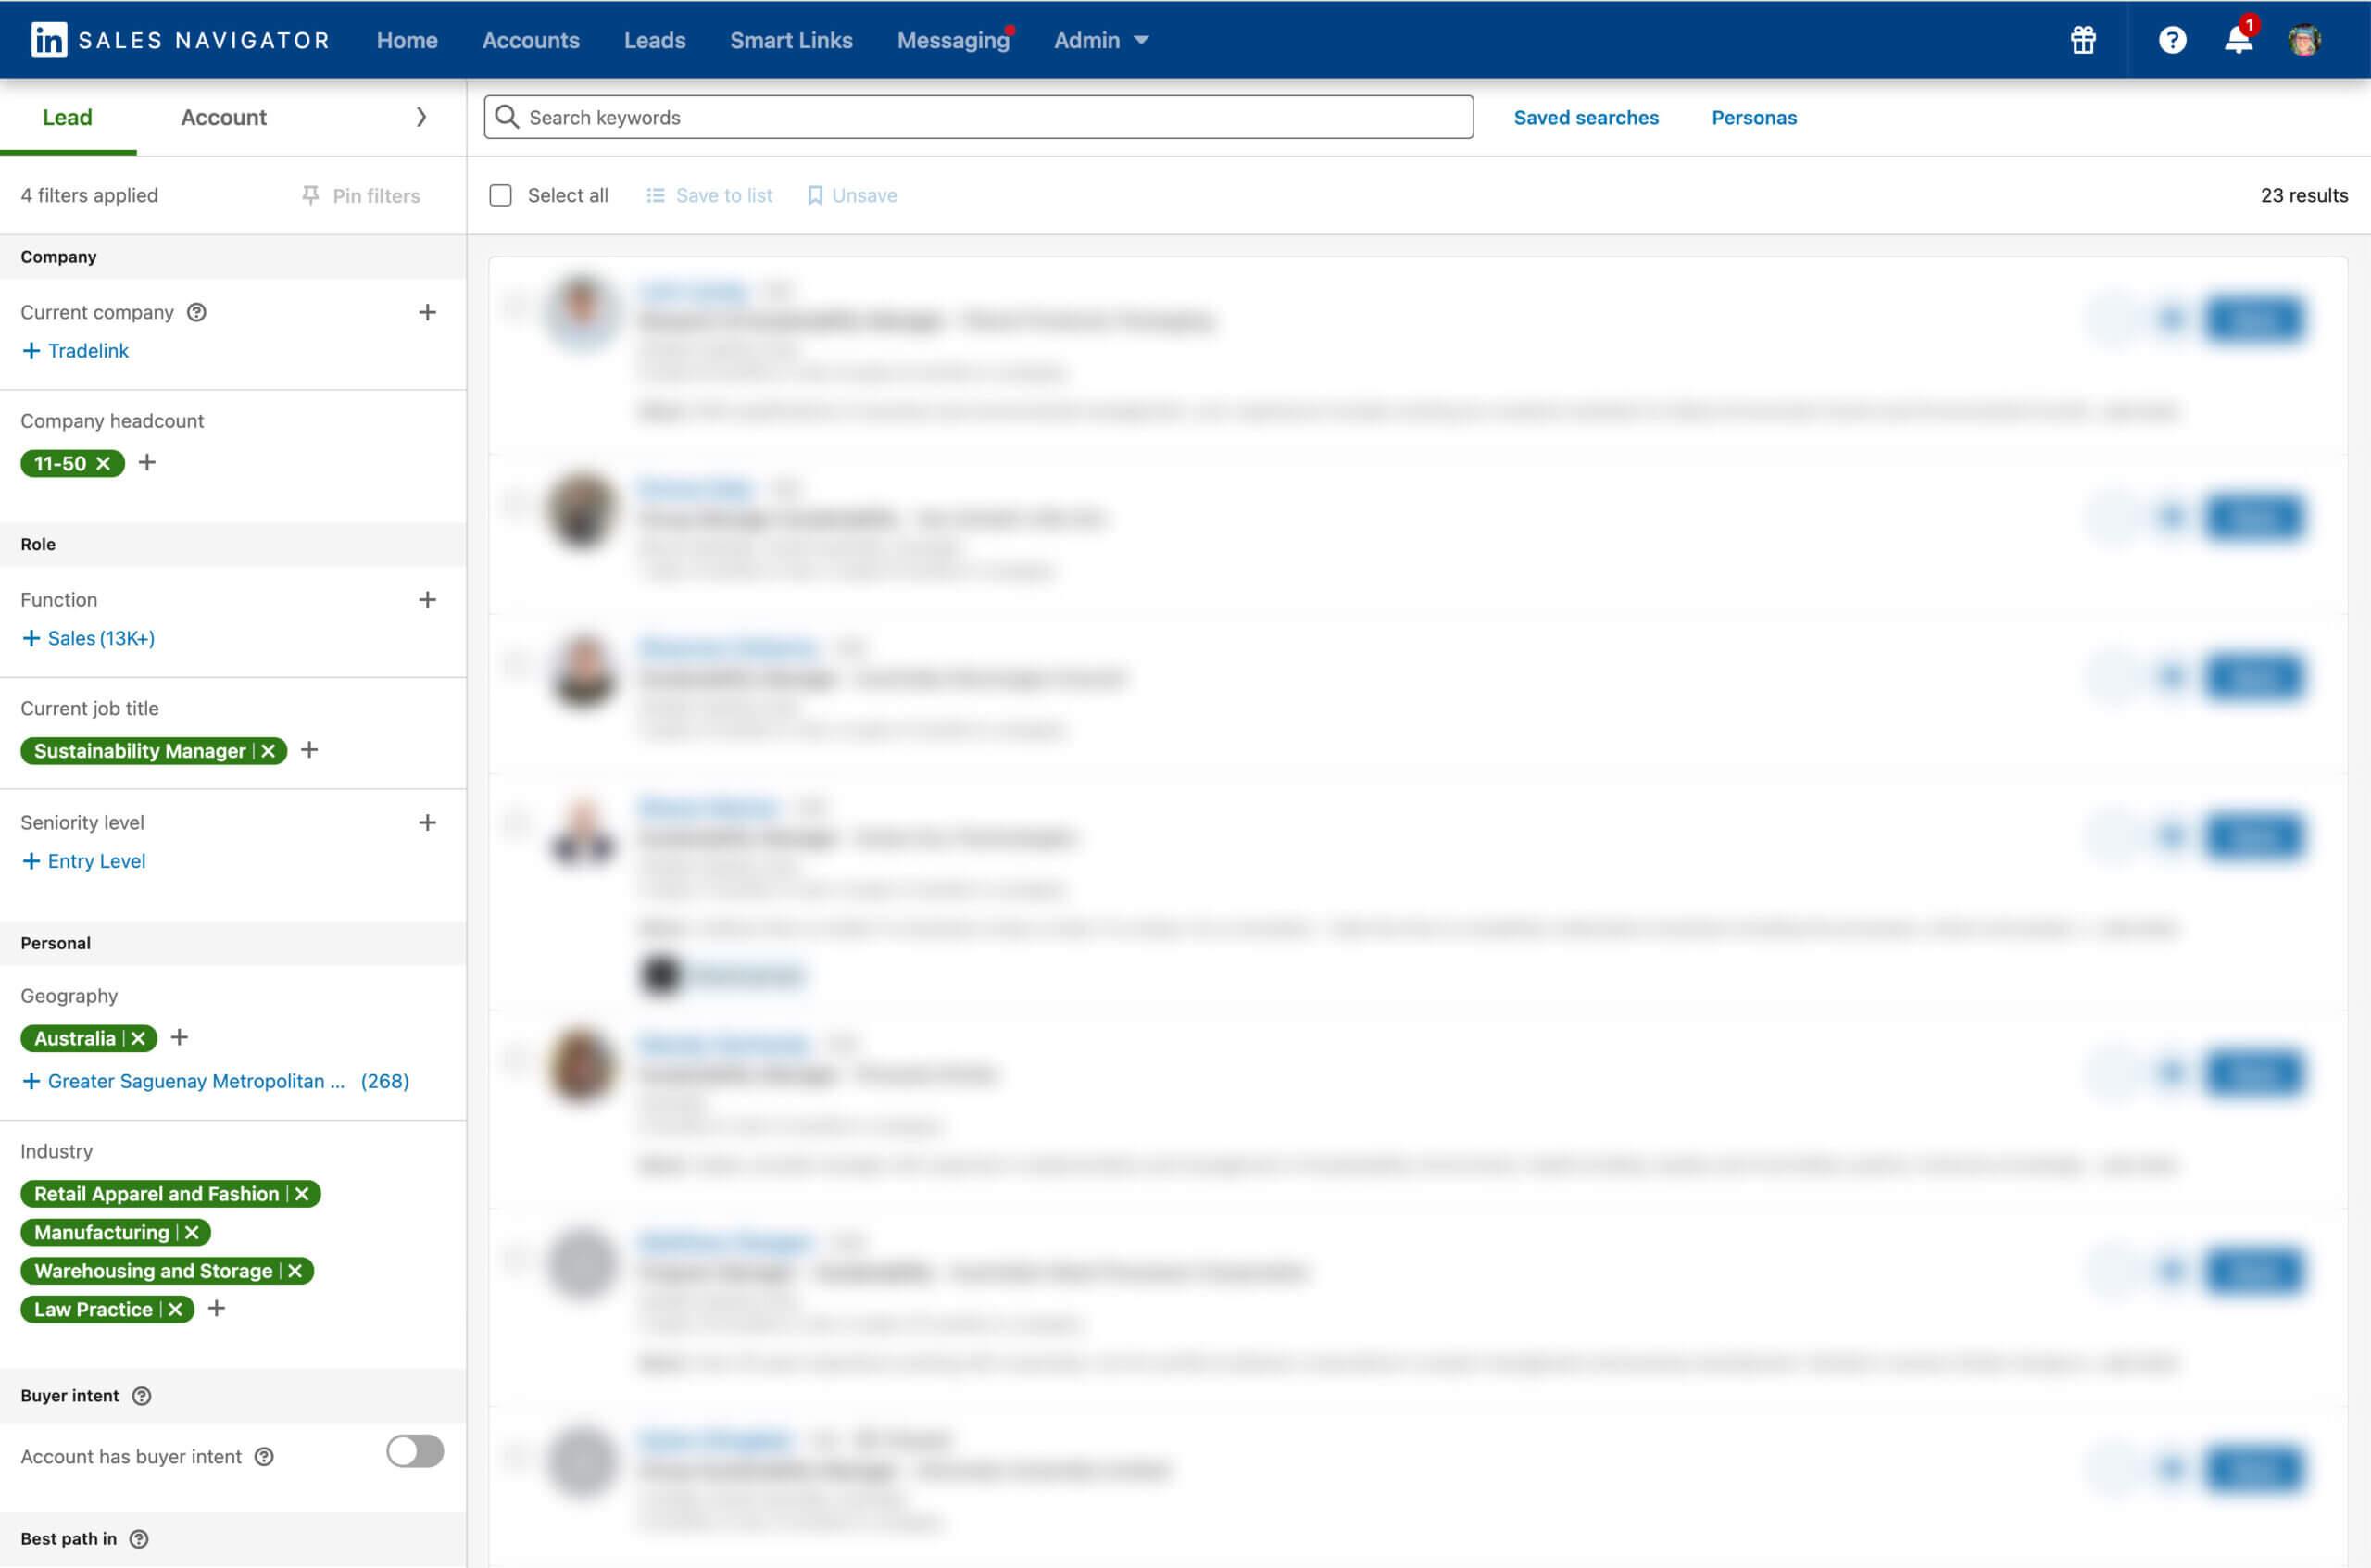 A screenshot from LinkedIn's Sales Navigator showing different filters such as company headcount, job title, and geography.